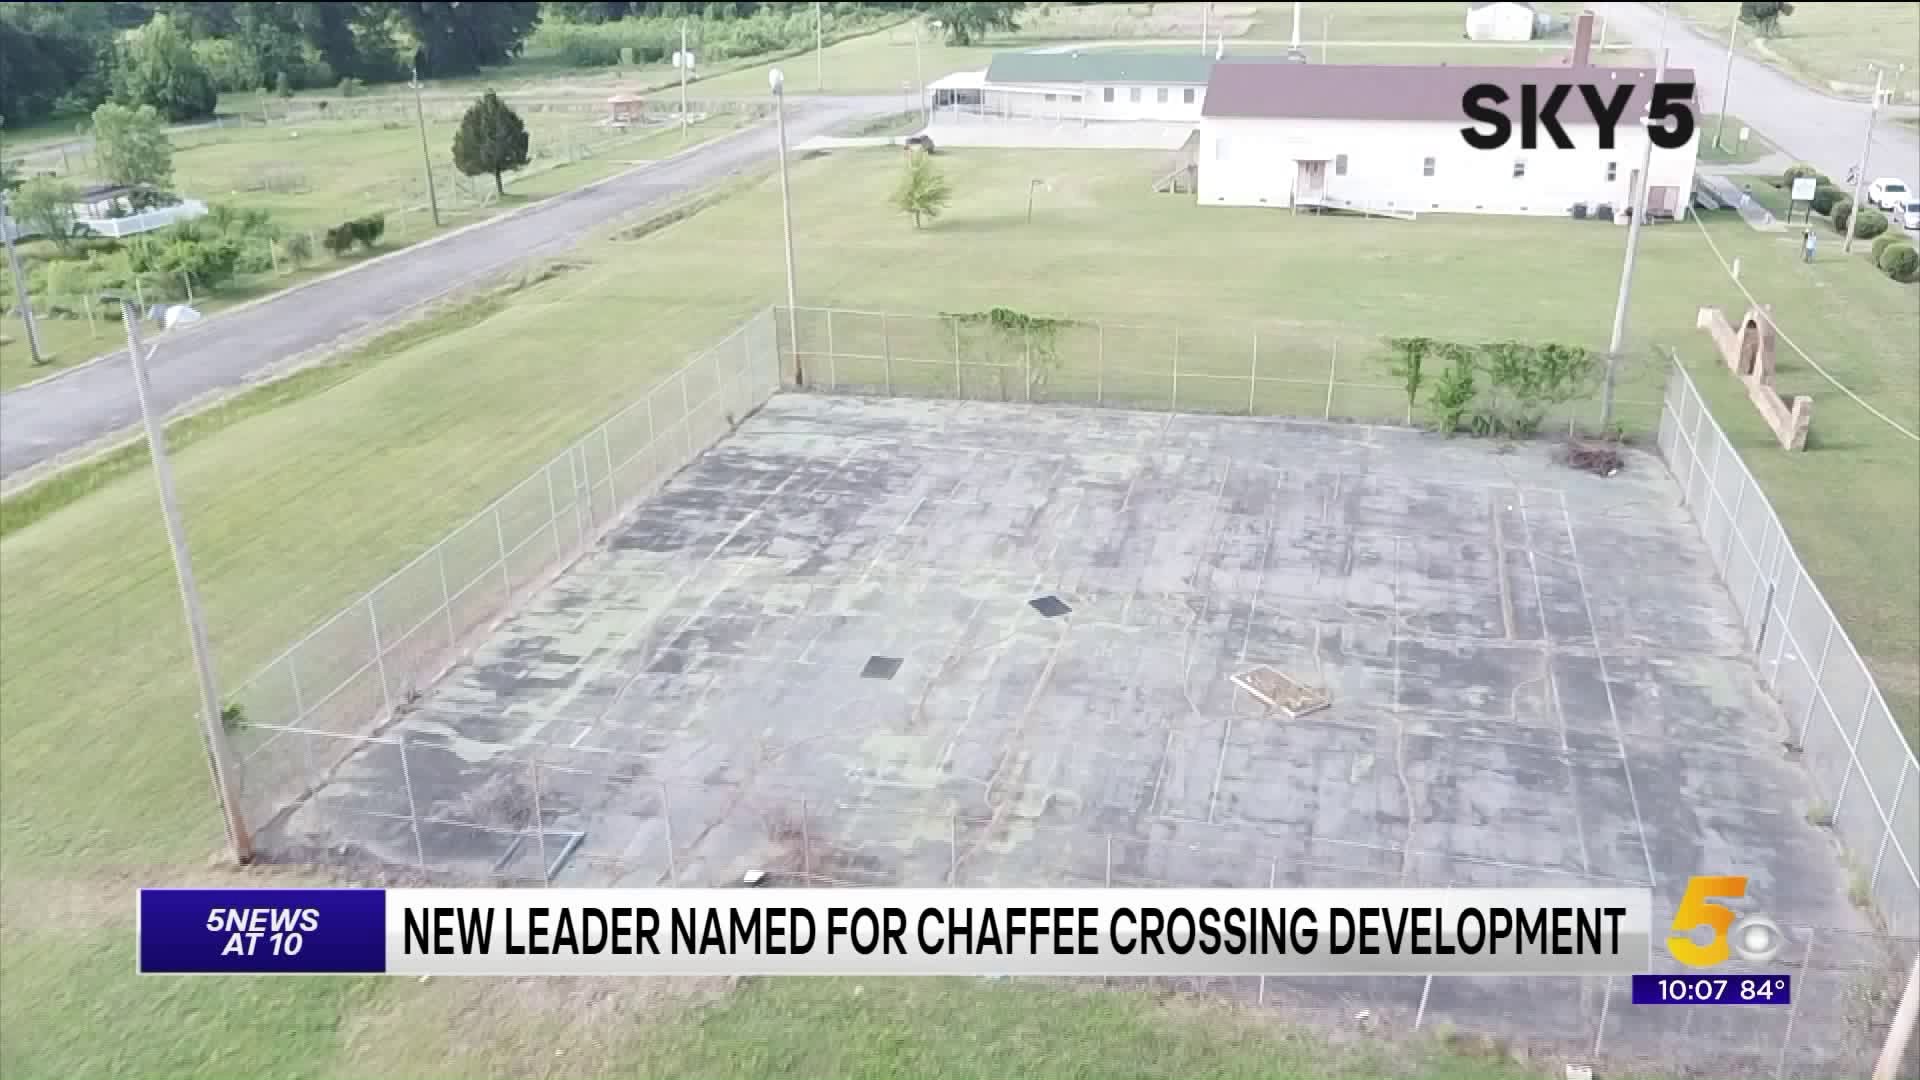 New Leader for Chaffee Crossing Development